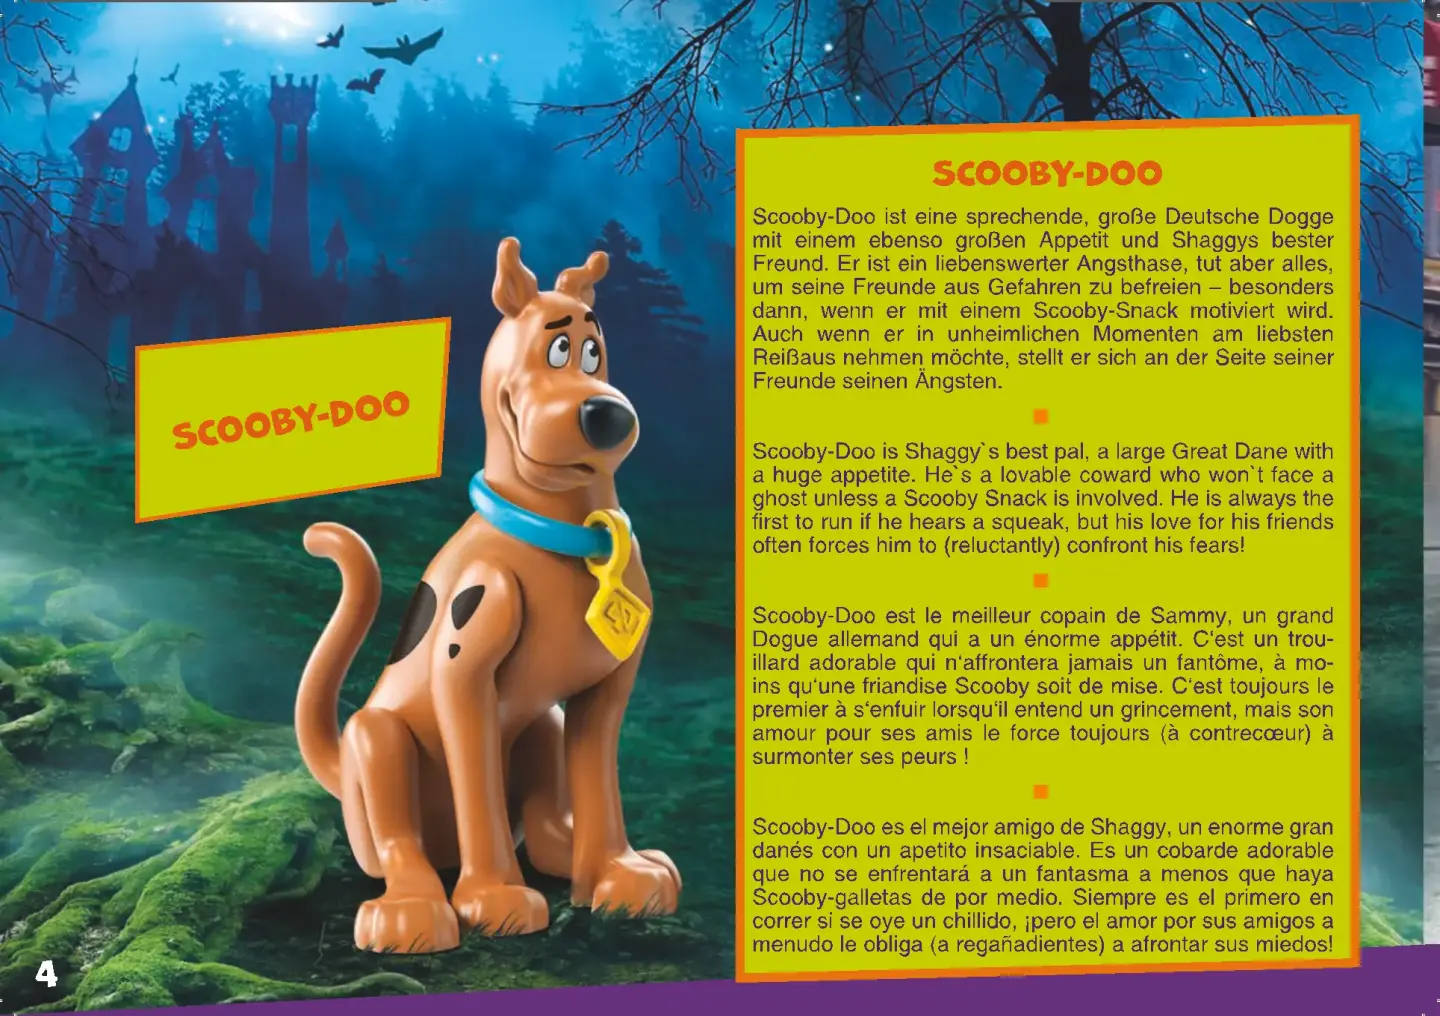 Abapri - Playmobil 70710 - SCOOBY-DOO! Adventure with Ghost Clown